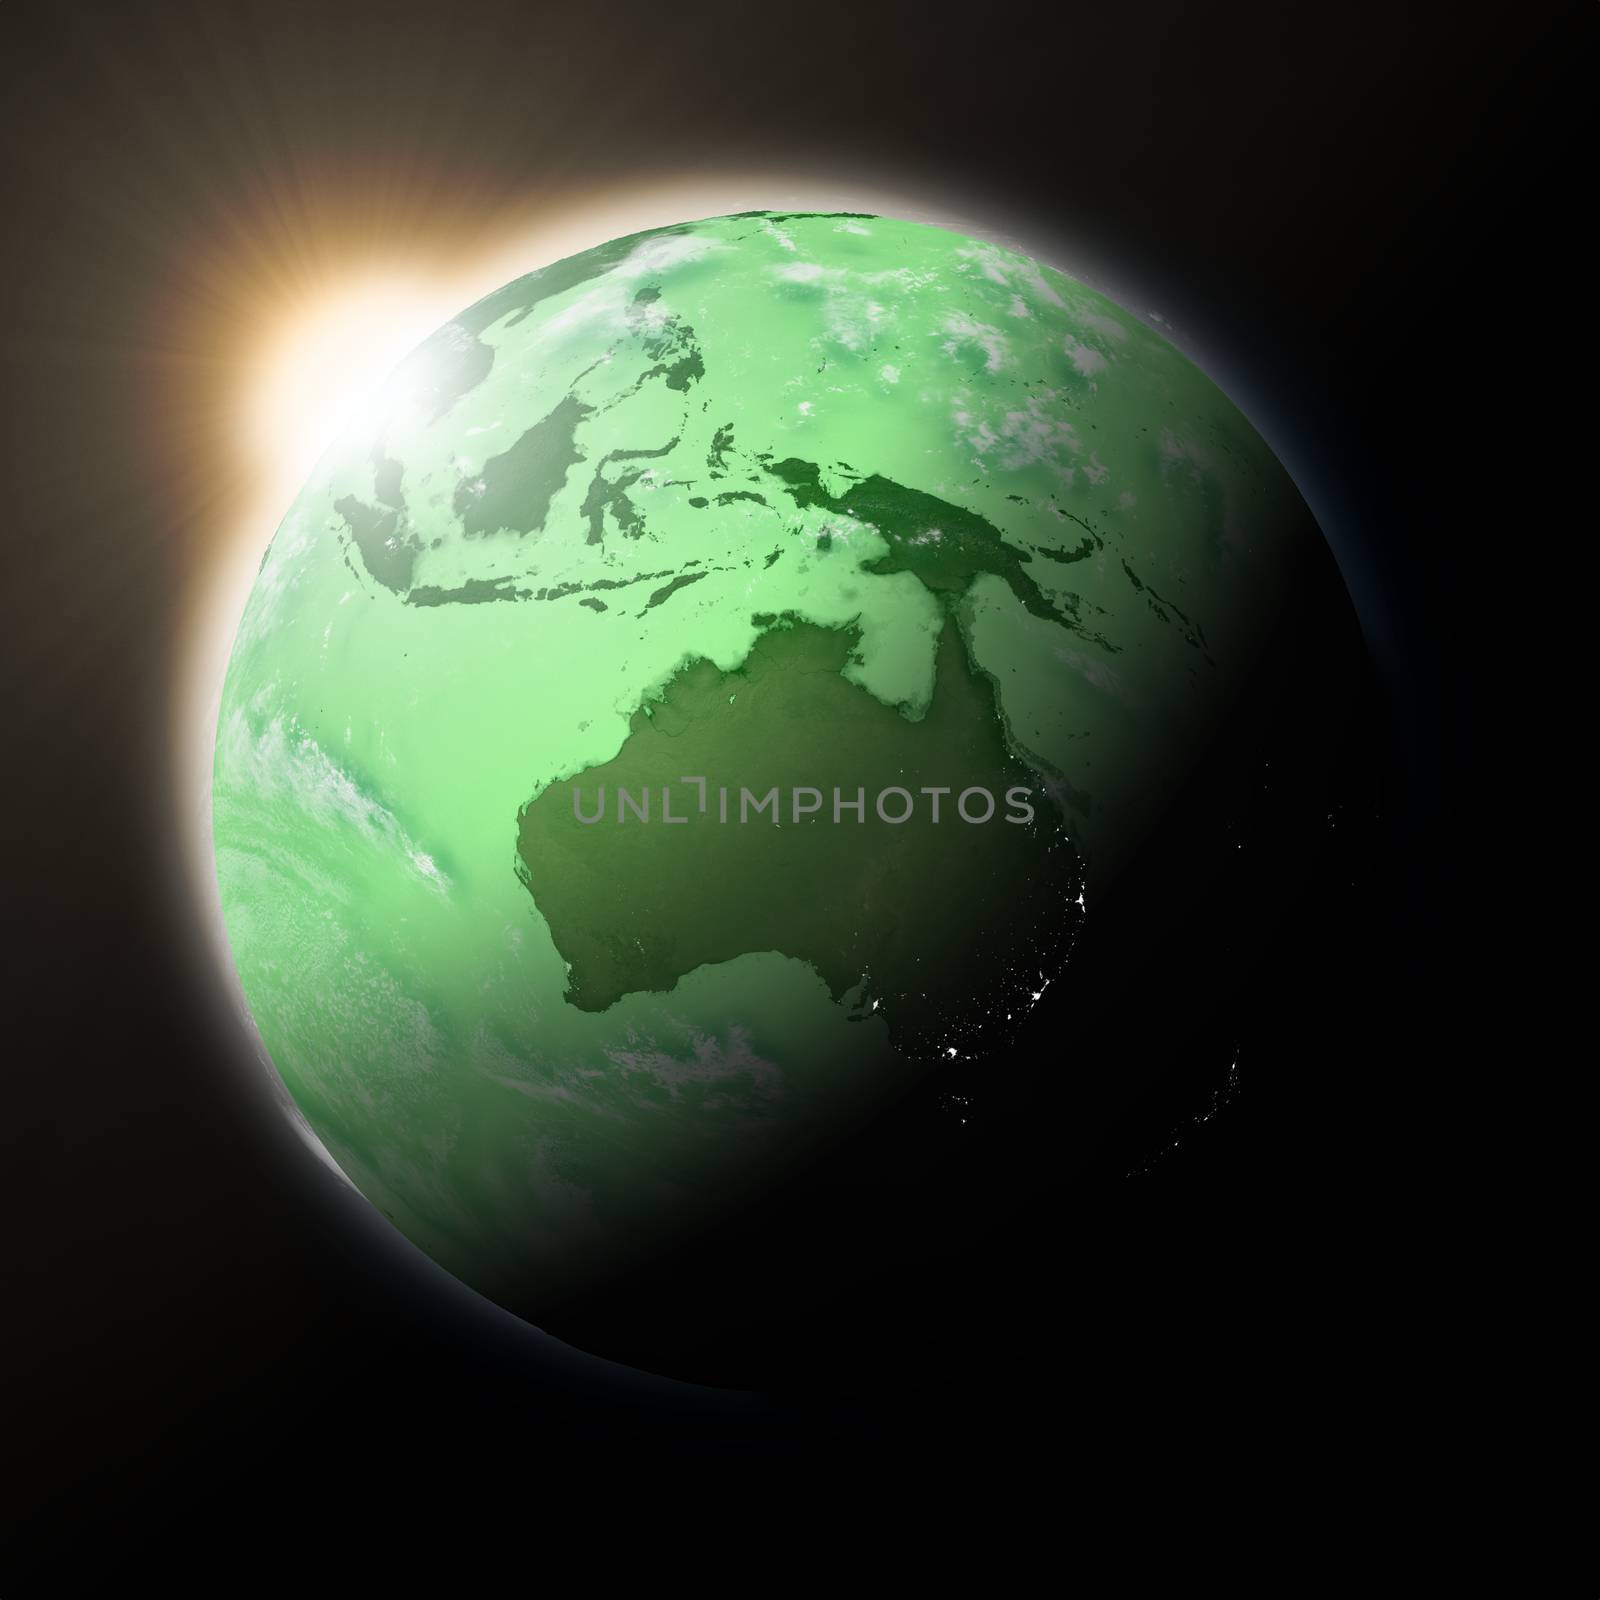 Sun over Australia on green planet Earth isolated on black background. Highly detailed planet surface. Elements of this image furnished by NASA.